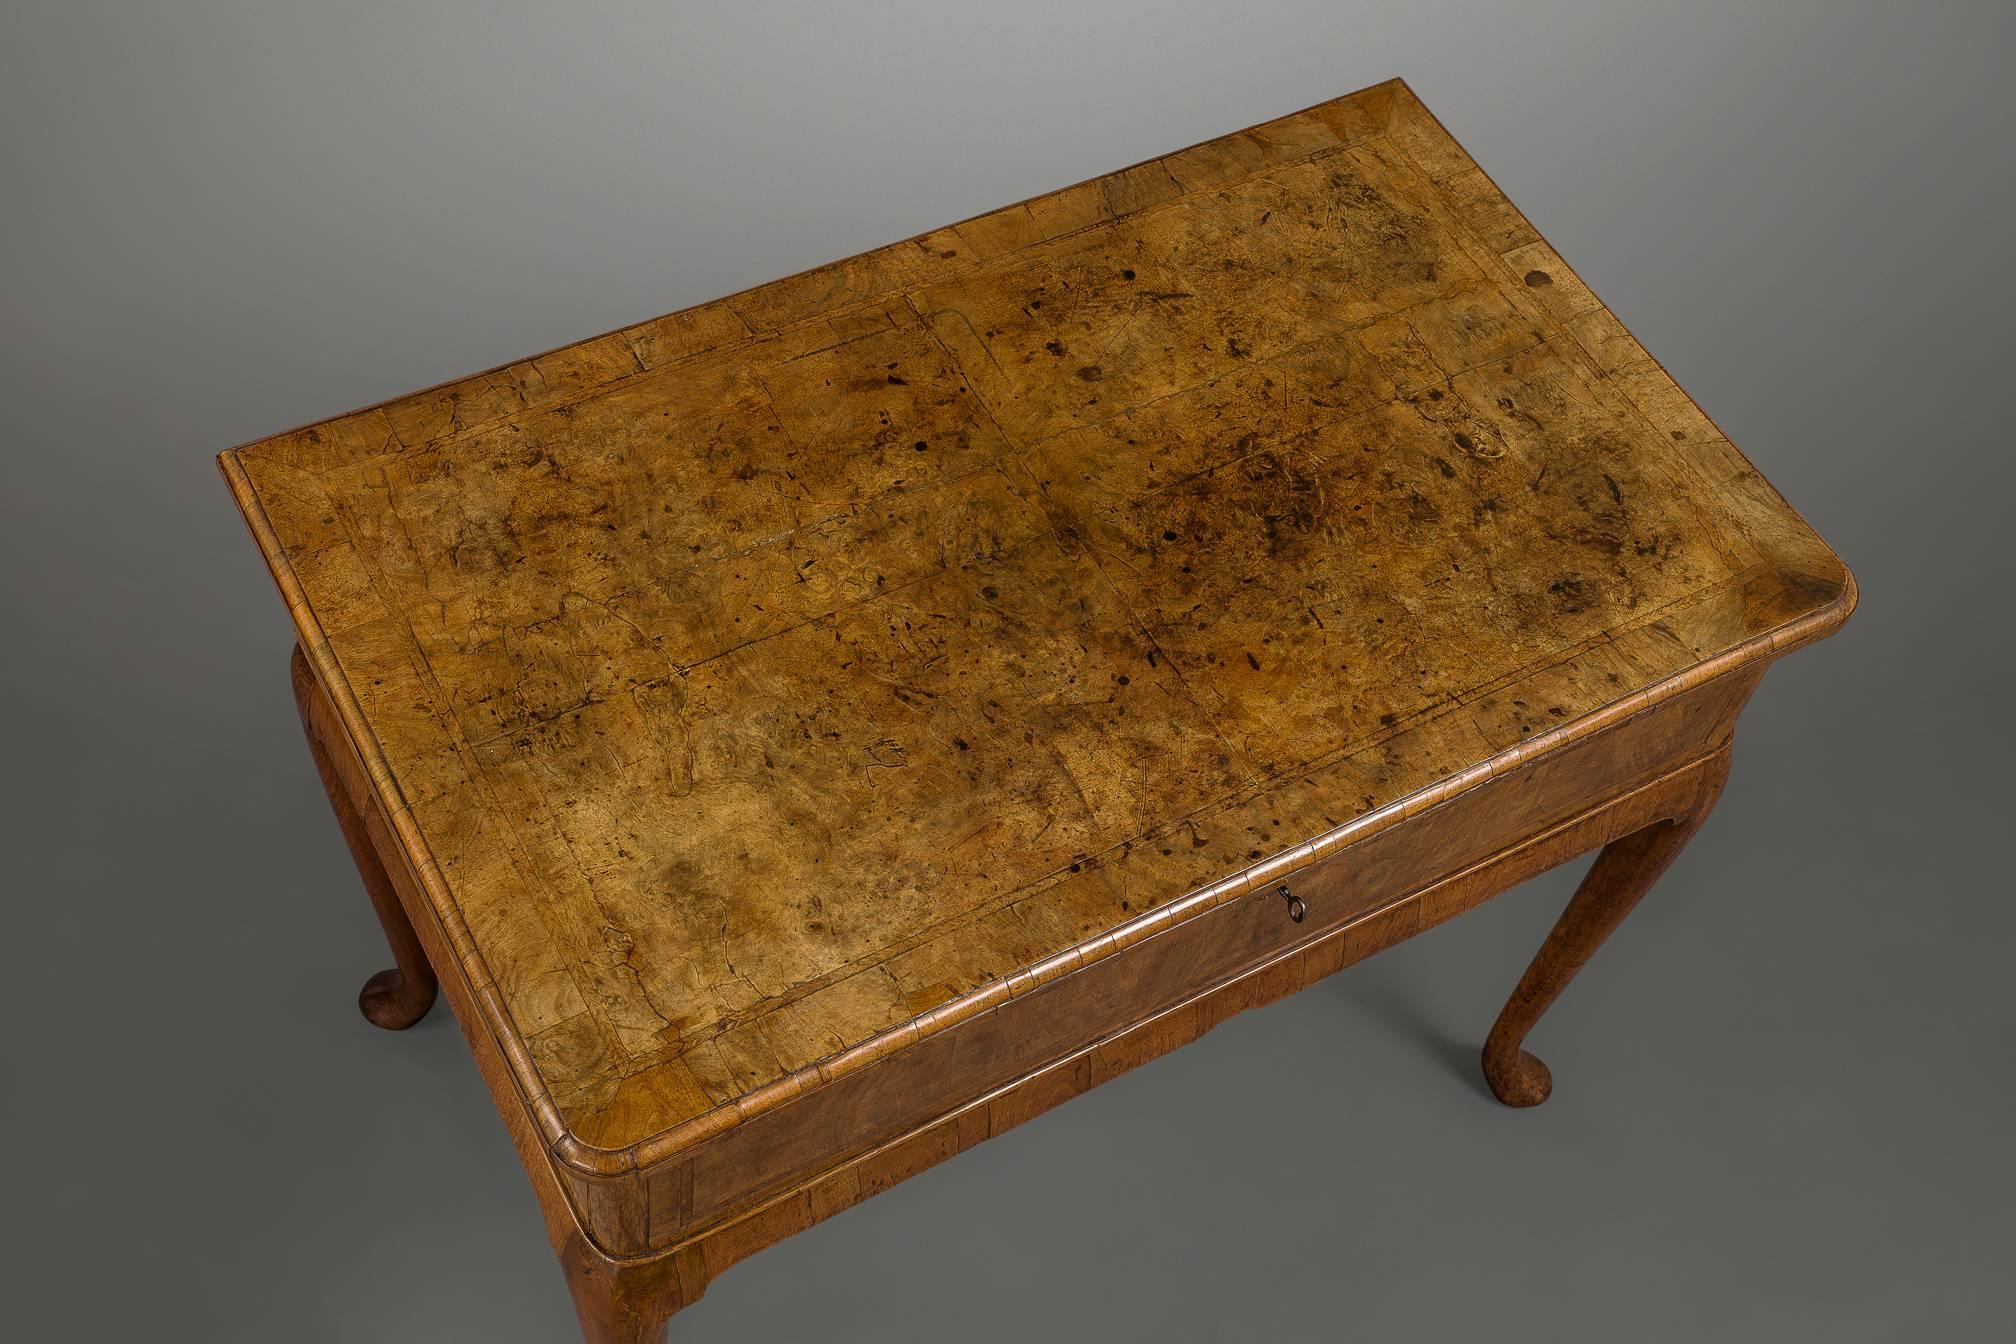 Standing on elegant tapering legs with a slight cabriole and pad feet this table has the most unusual feature of a lockable lift-up top for the storage of valuables. The top is veneered in quartered burr veneer of glorious color with herring-bone